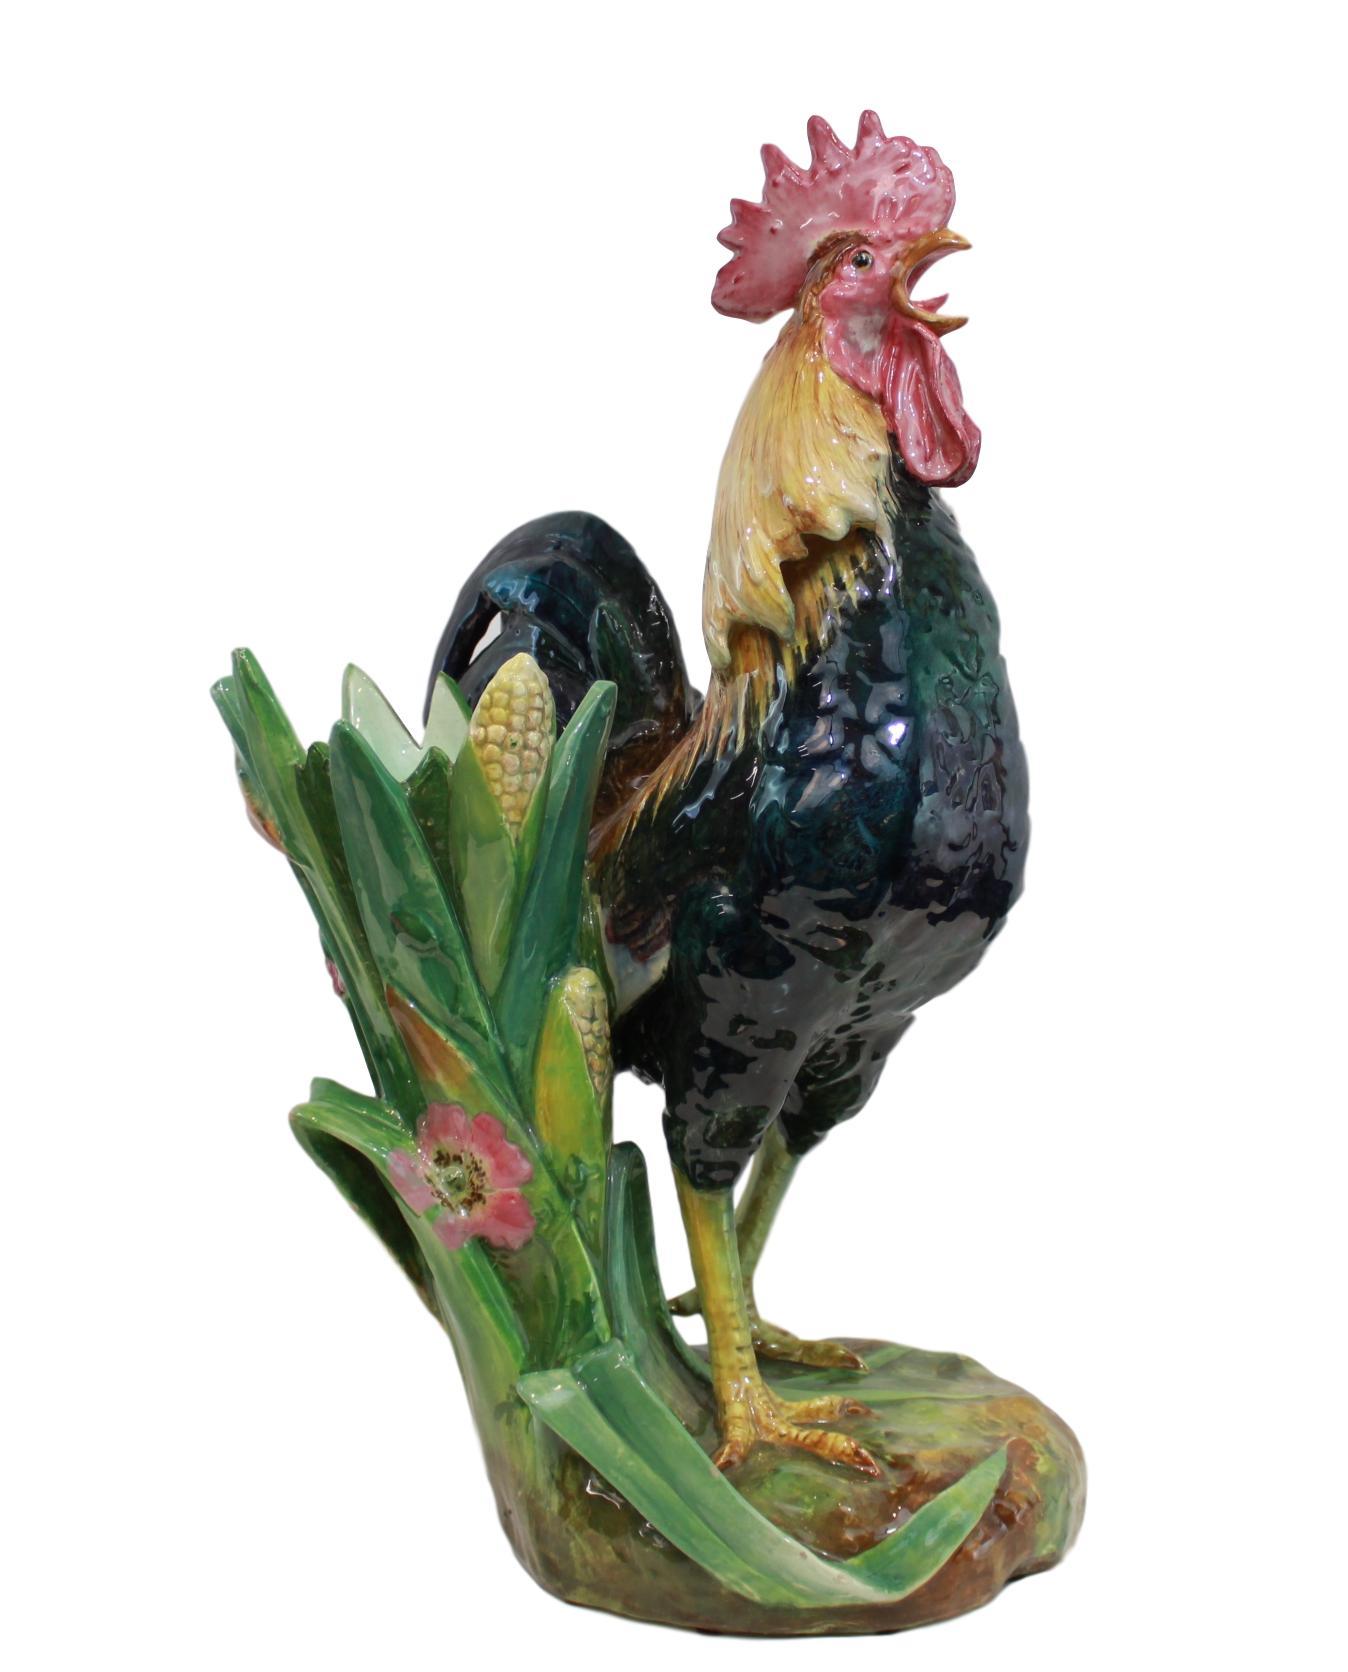 Very large French Majolica (Barbotine) rooster vase by Jerome Massier, French, circa 1880, modeled as a life-size crowing rooster (tongue intact, often missing or restored), naturalistically and vibrantly glazed in brown, blue, black, yellow, green,